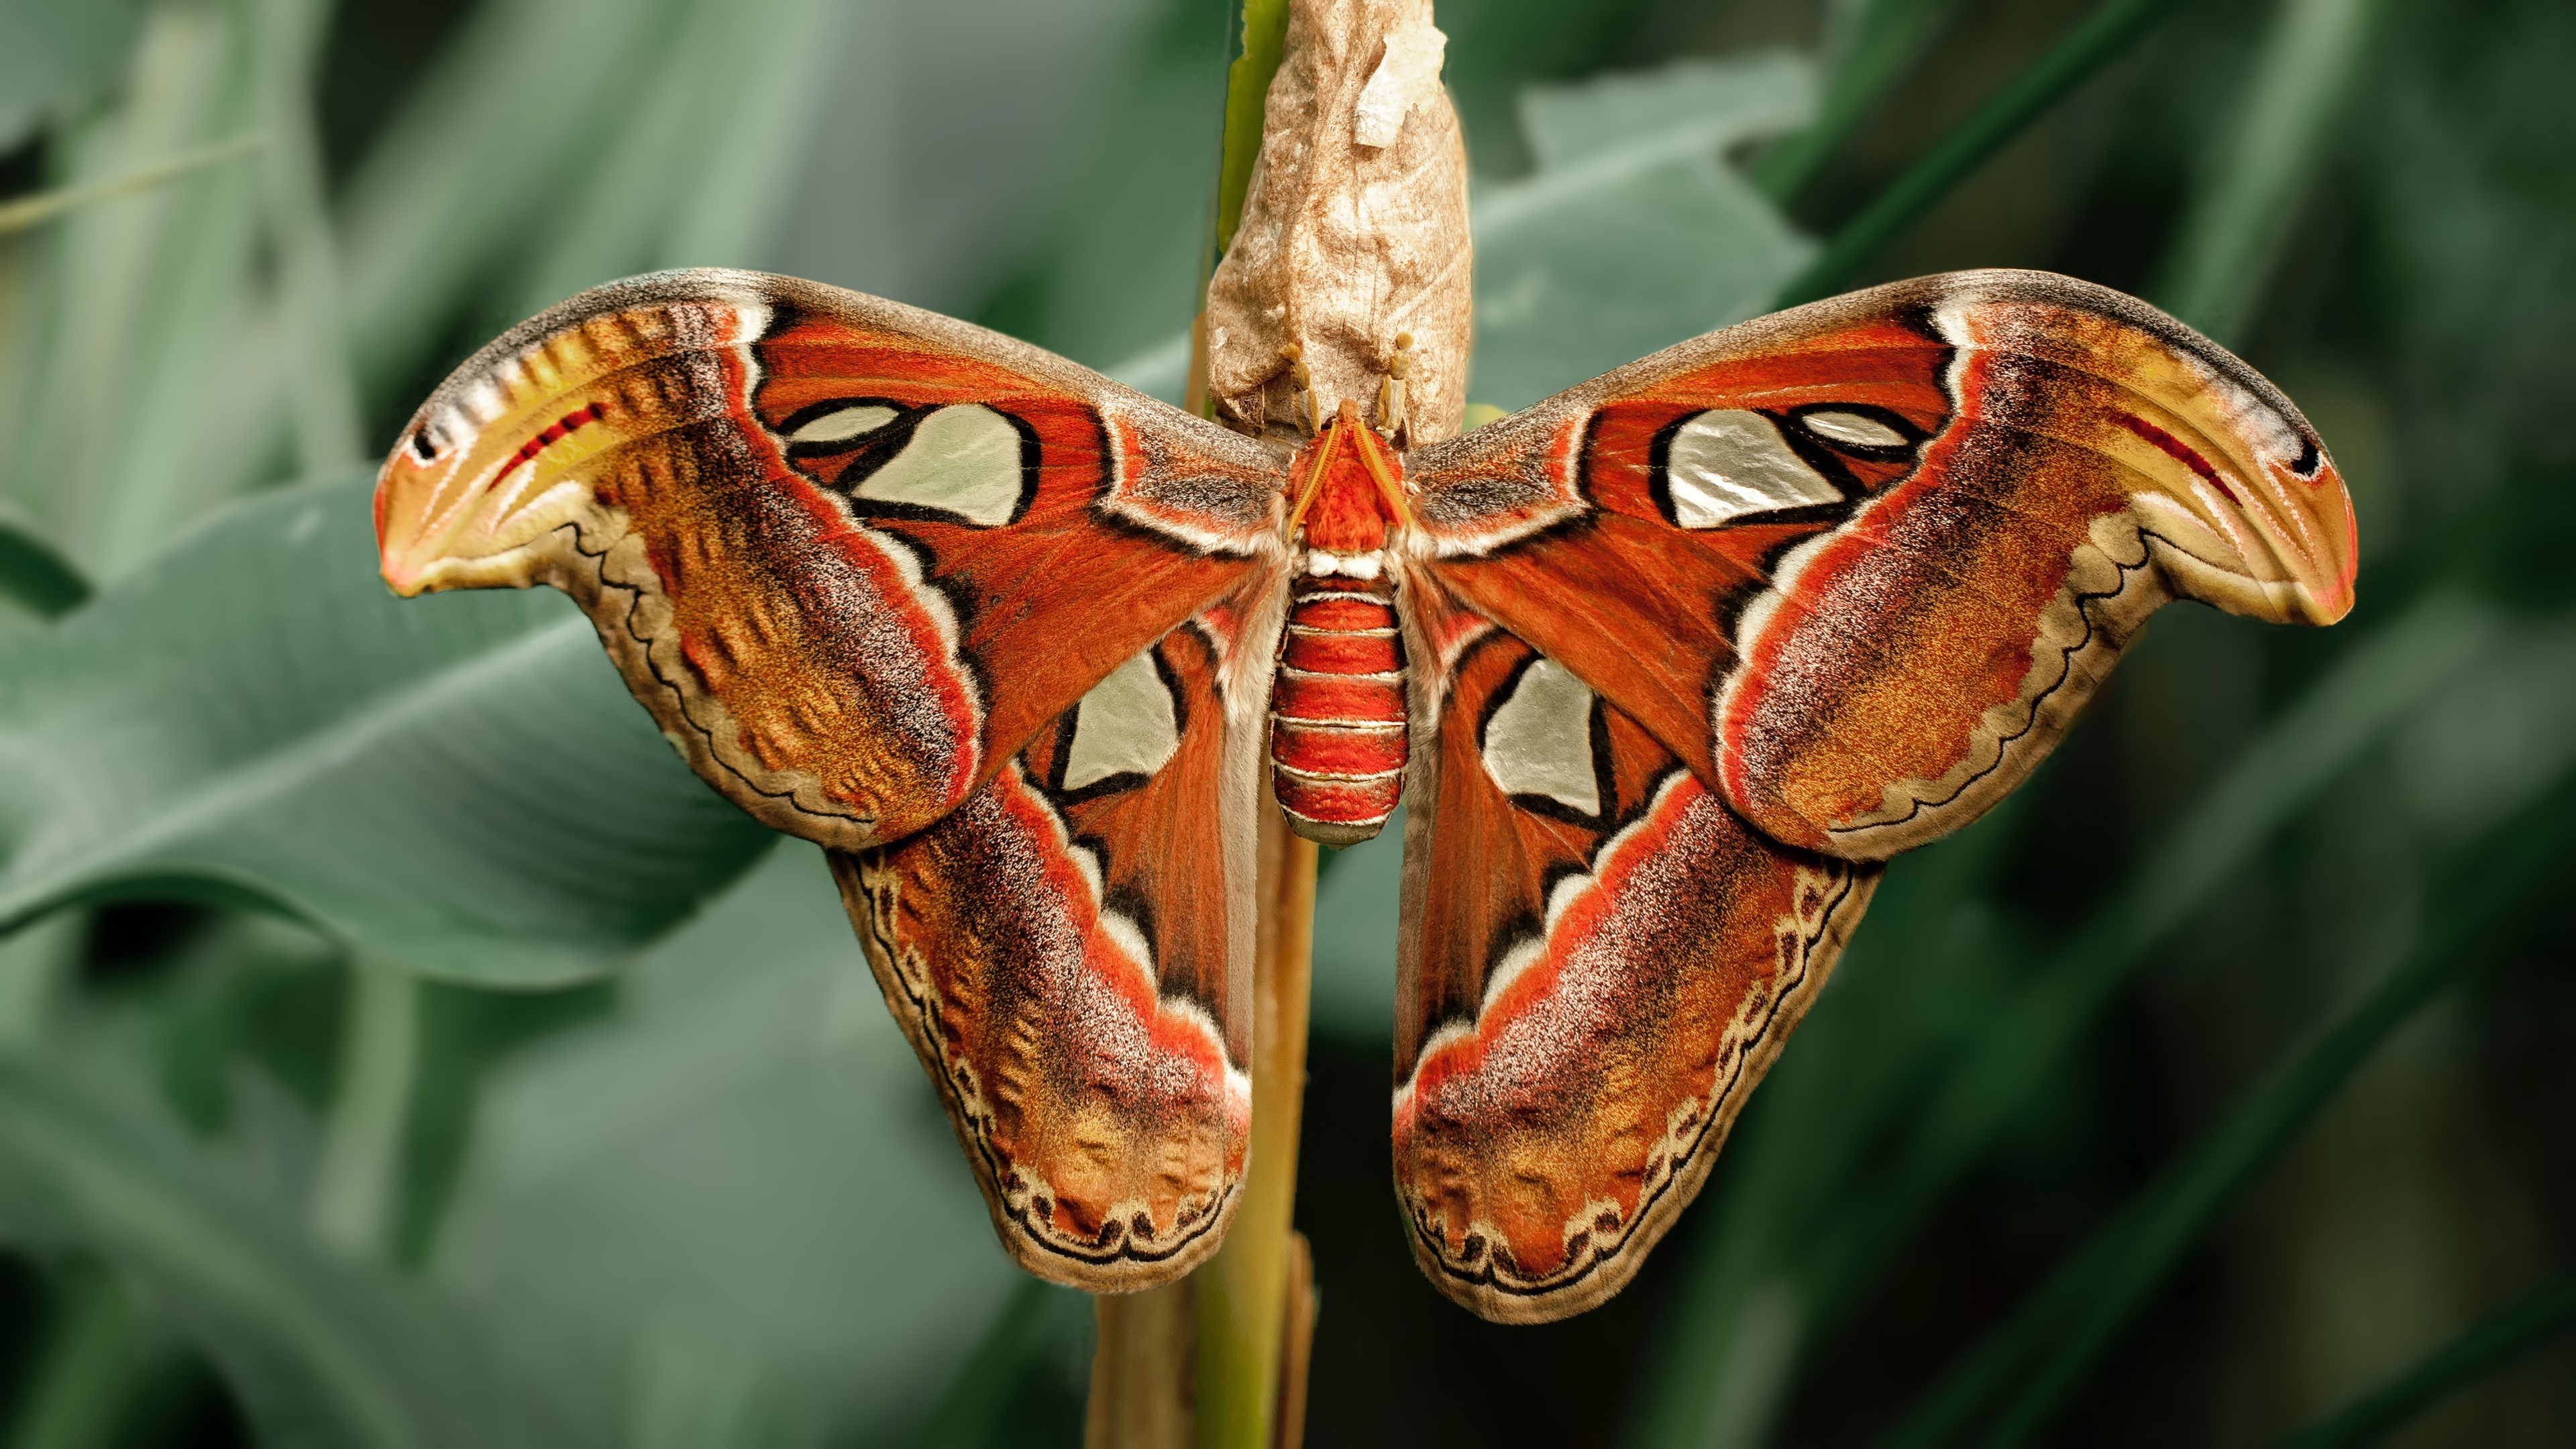 Moth in 4K, Captivating details, Ultra HD quality, Perfect for screens, 3840x2160 4K Desktop